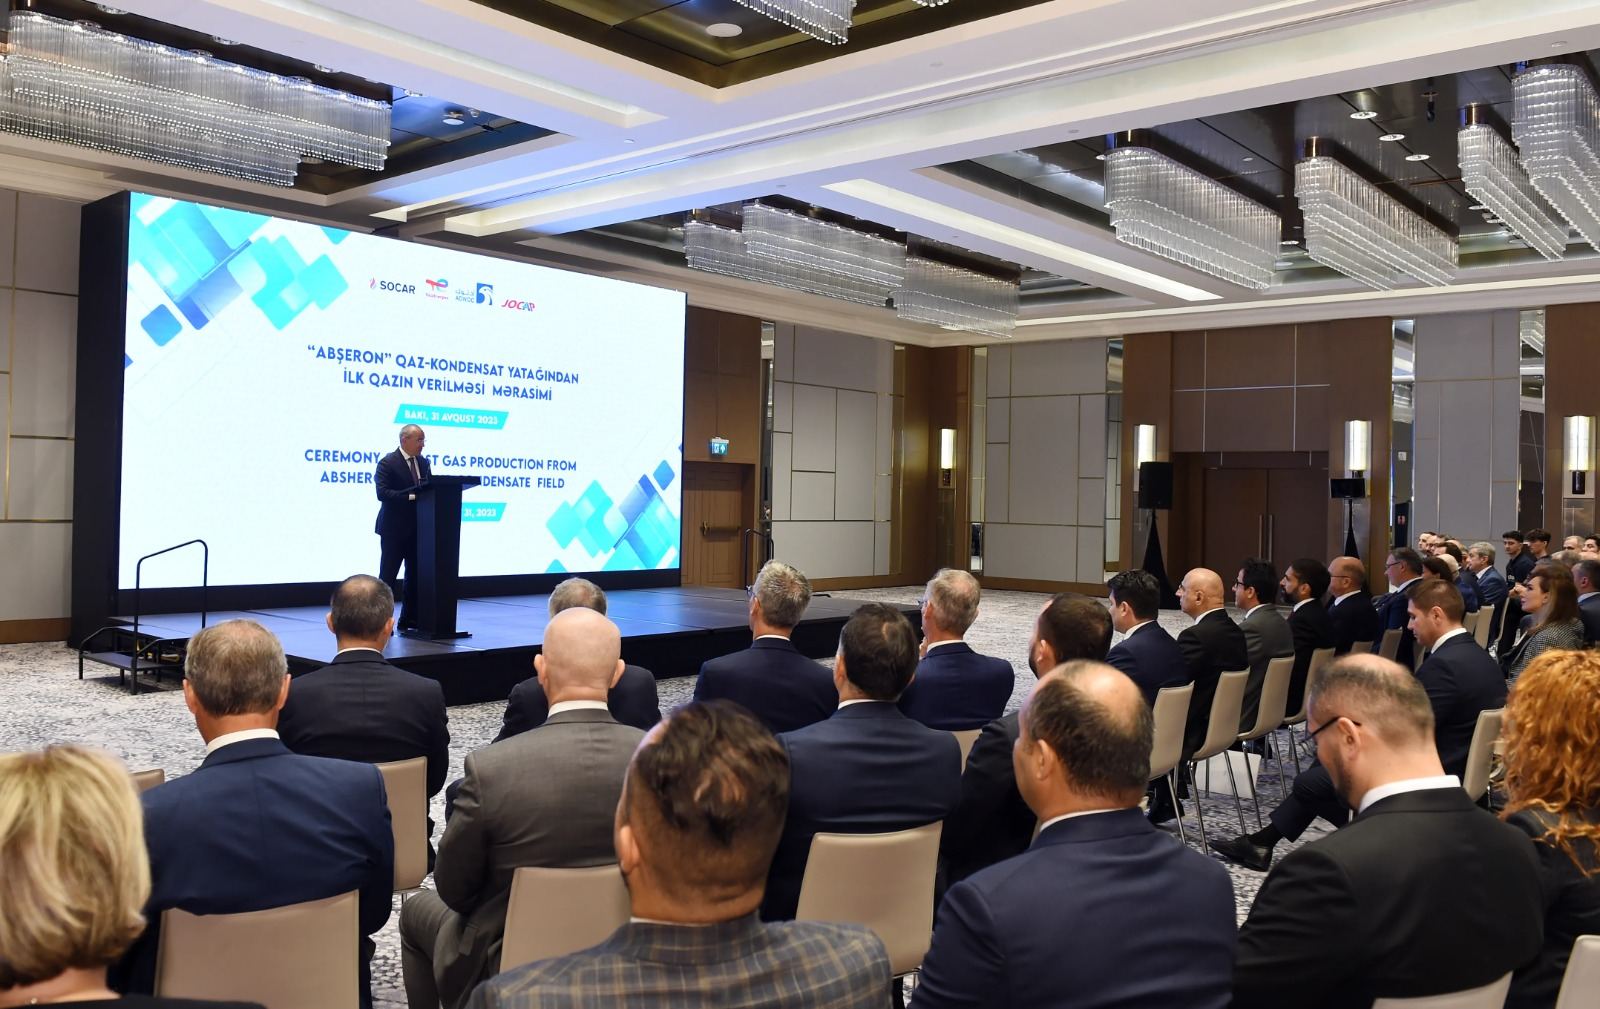 Baku holds event dedicated to first gas supply from Absheron gas condensate field (PHOTO)